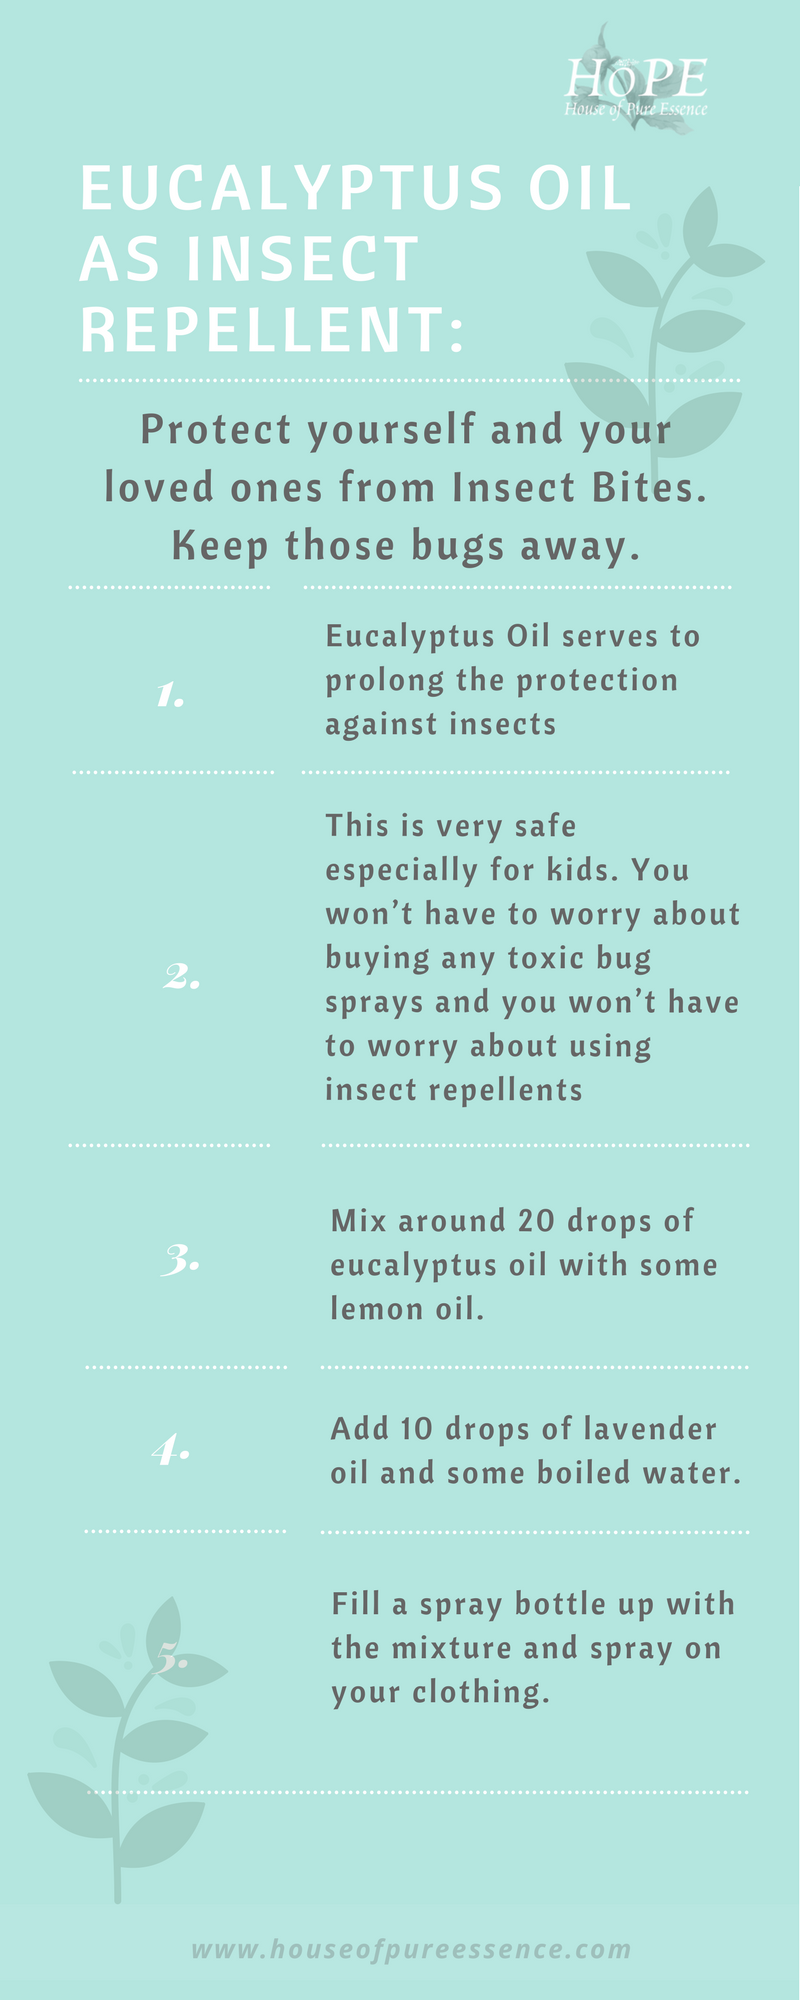 HoPE Eucalyptus Oil as Insect Repellent